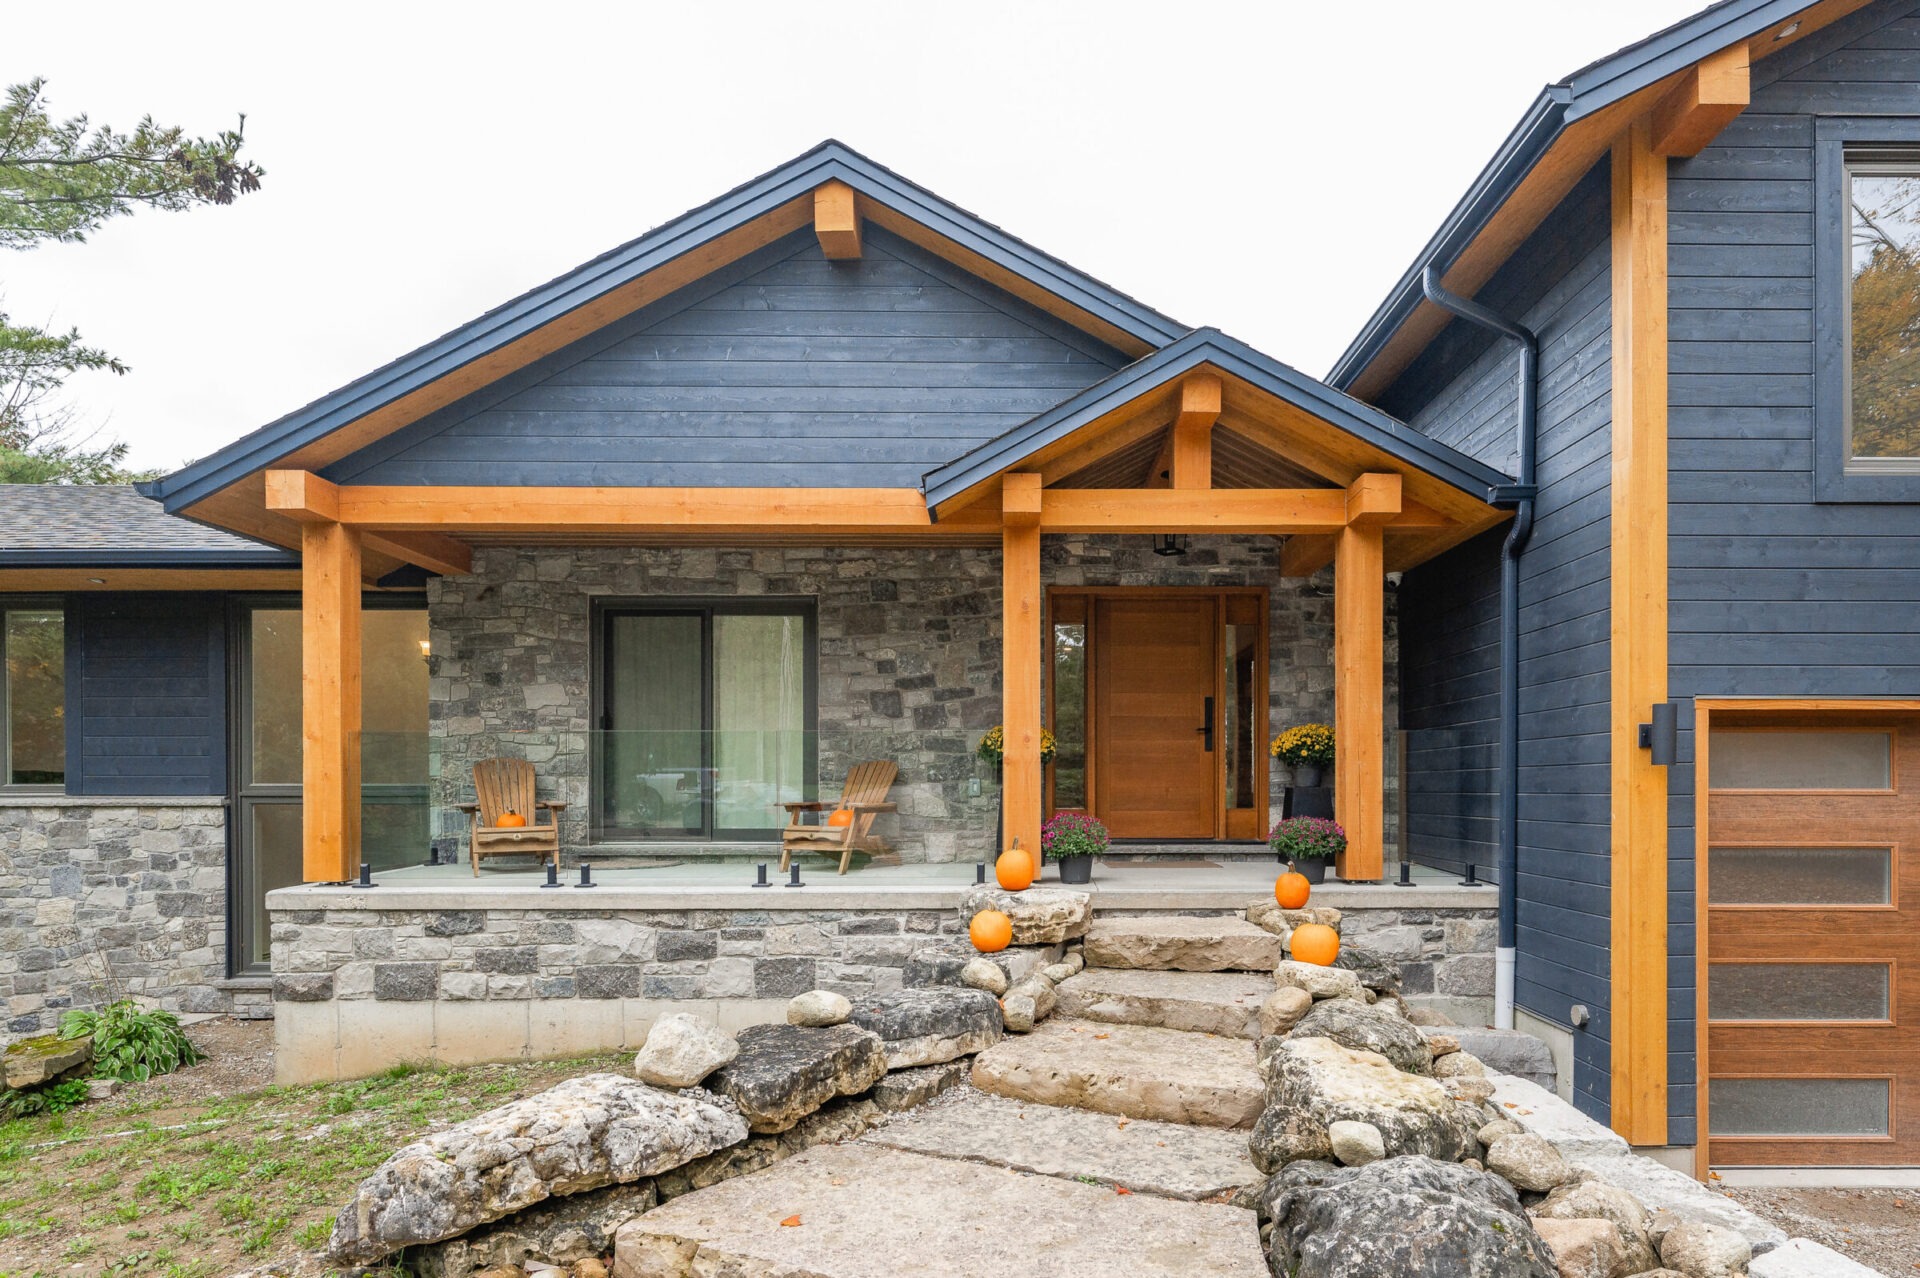 This image shows a modern house with dark blue siding, wooden accents, stone foundation, a porch with chairs, fall decorations, and a stone pathway.